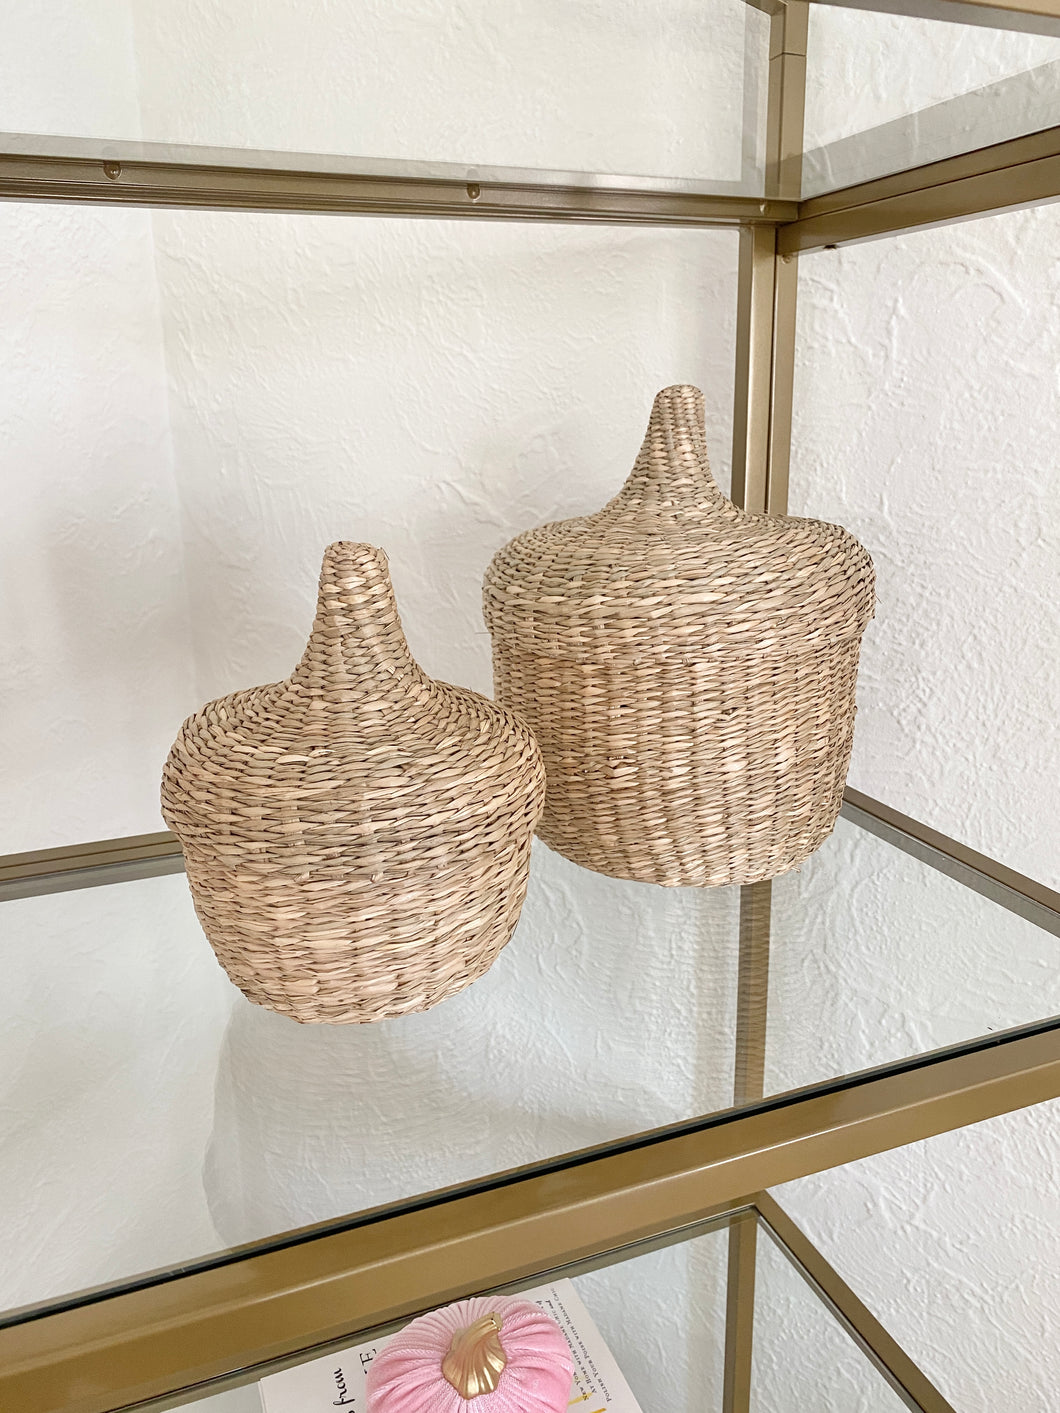 Hand-Woven Seagrass Baskets